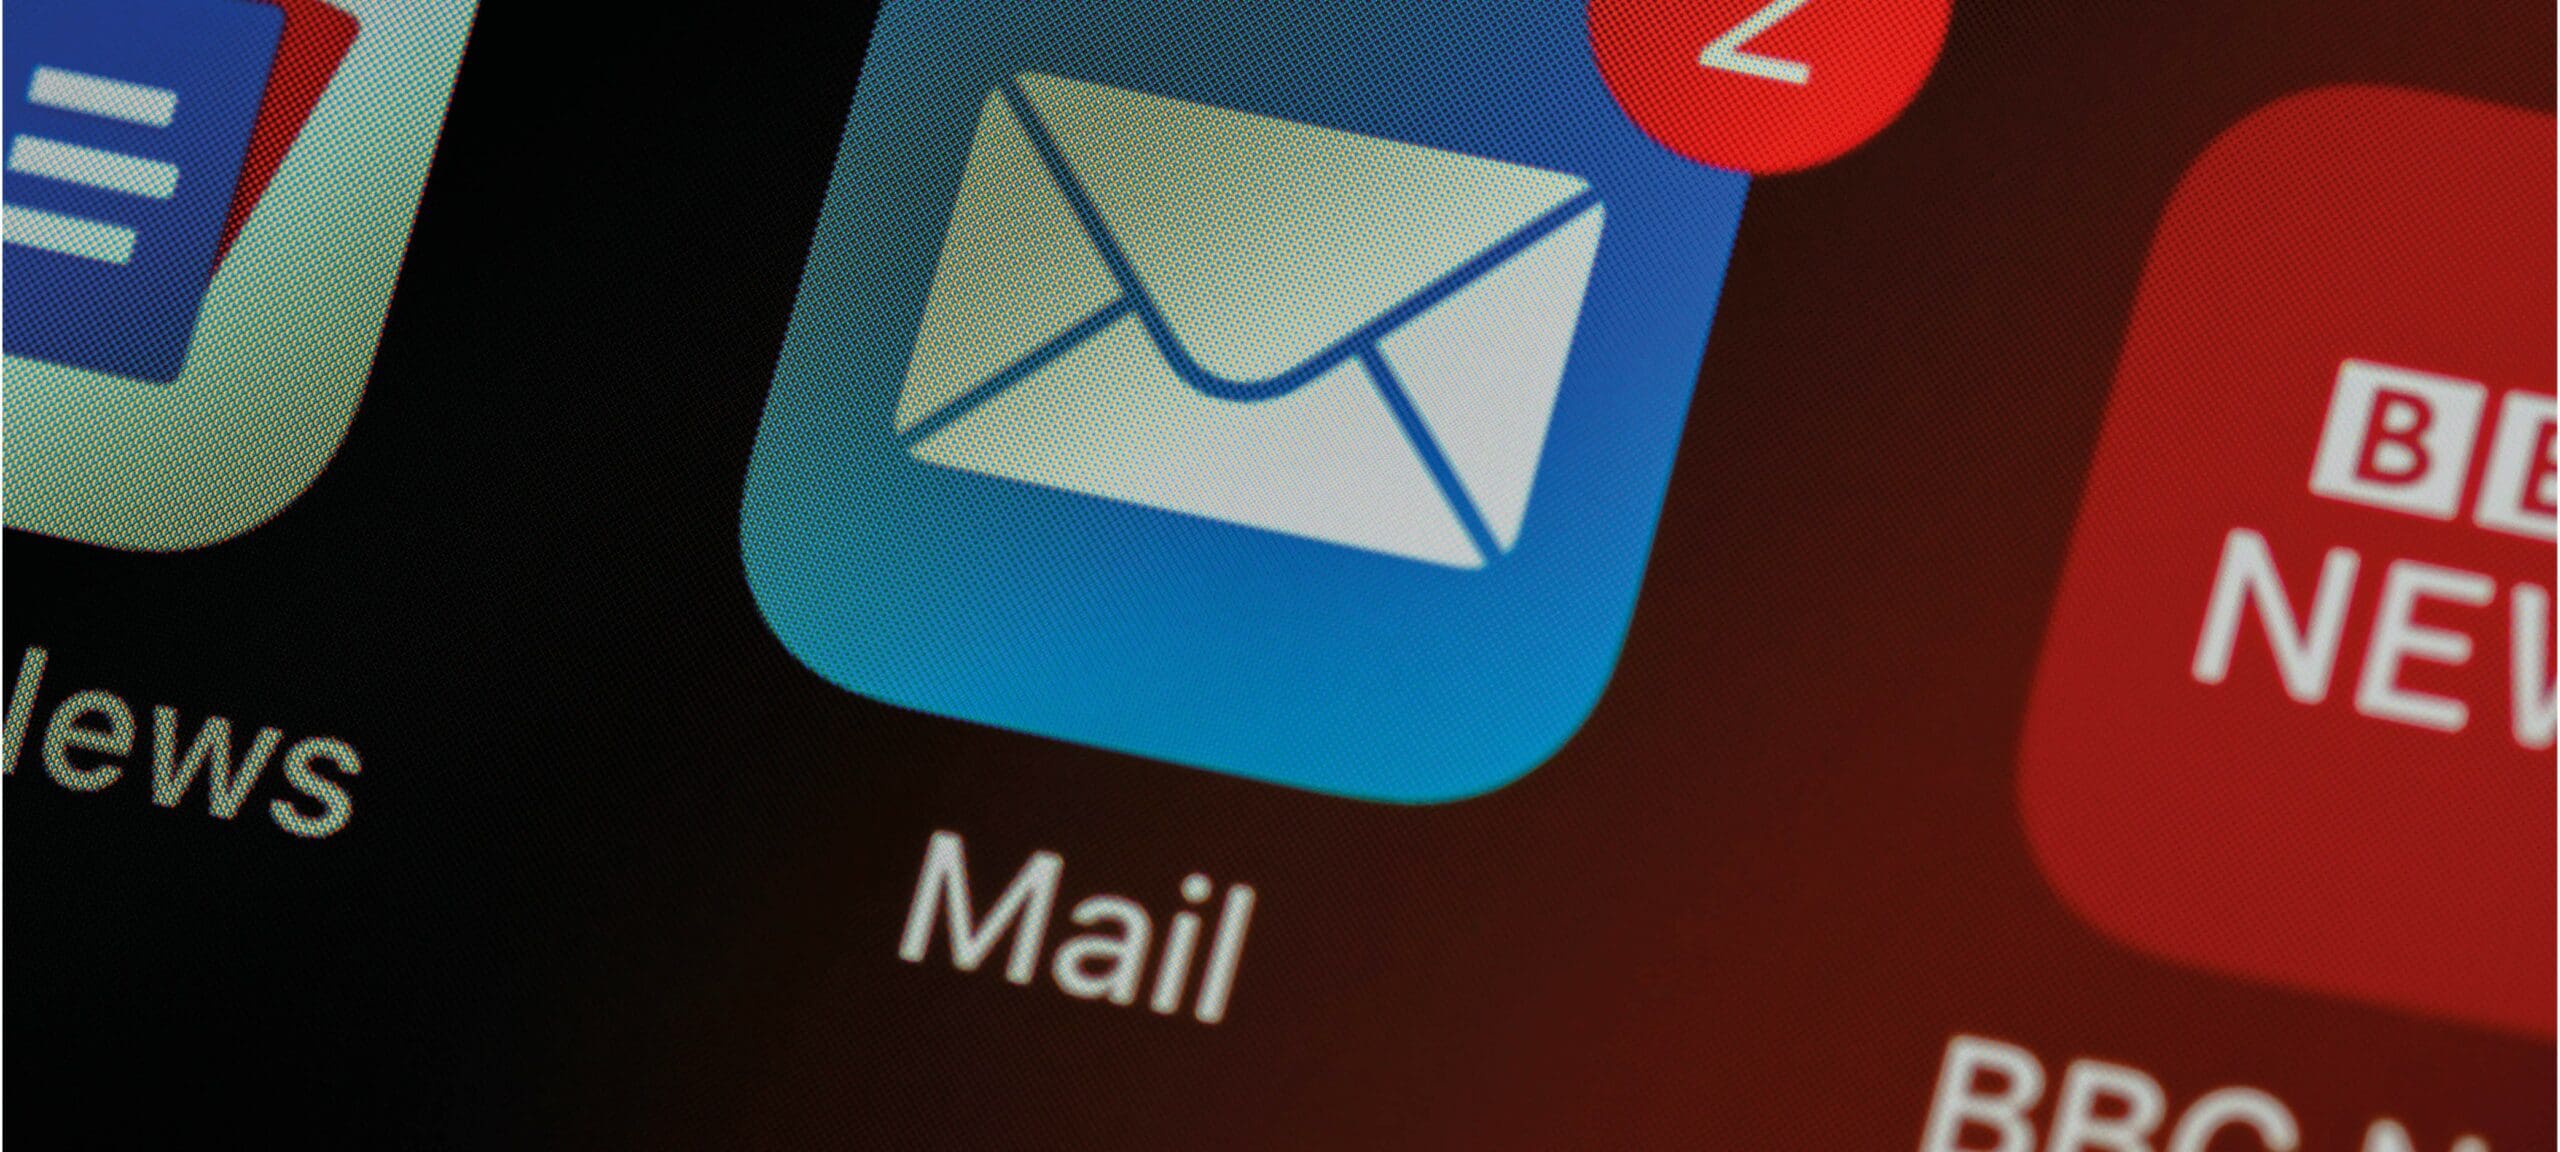 E-mail icoontje op smartphone